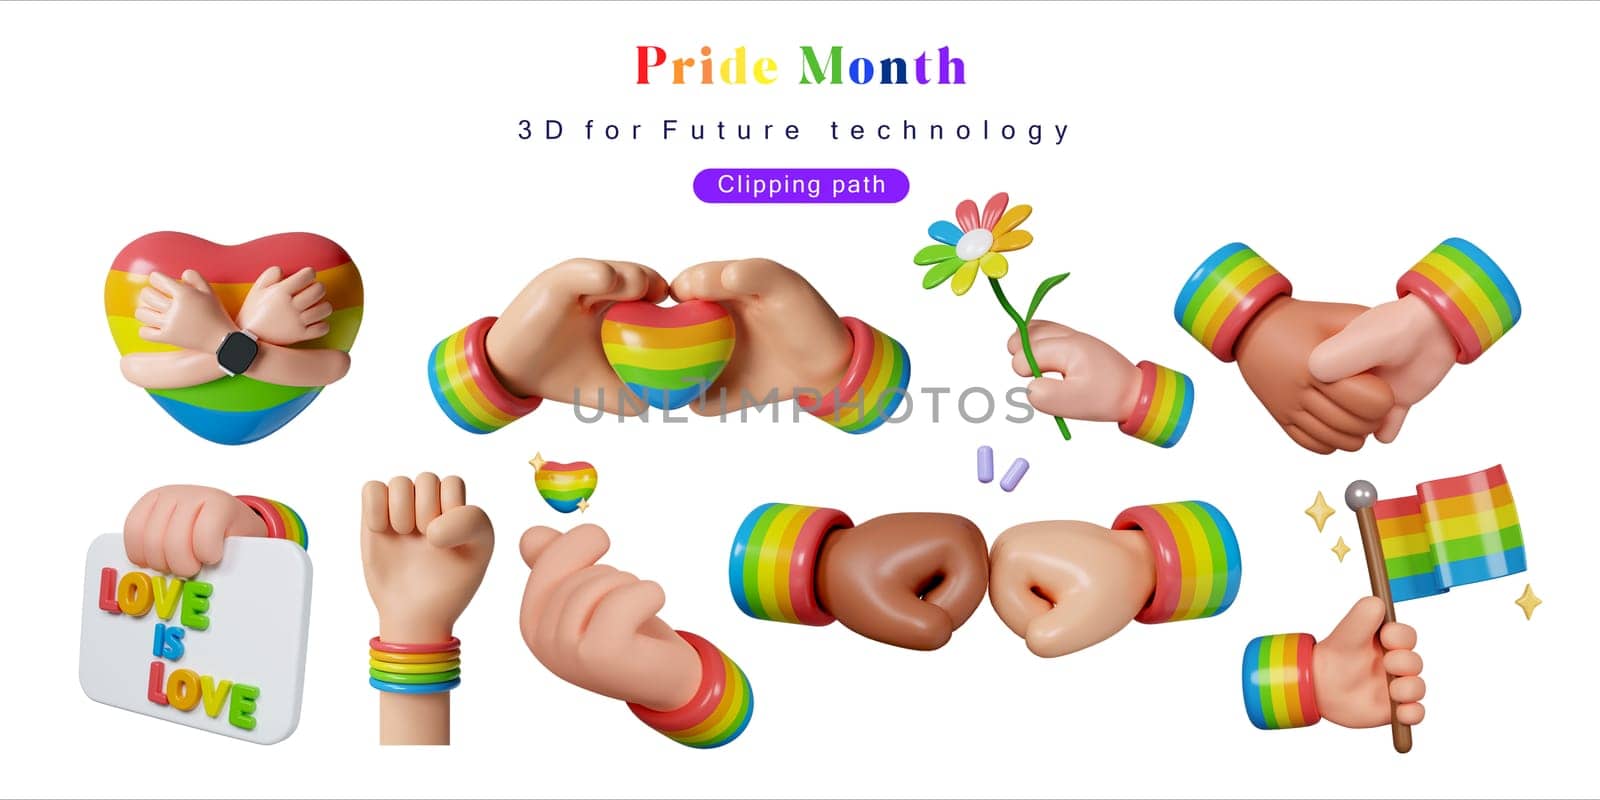 Pride day 3D icon set. Hand shows different gestures signs, 3d rendering illustration.